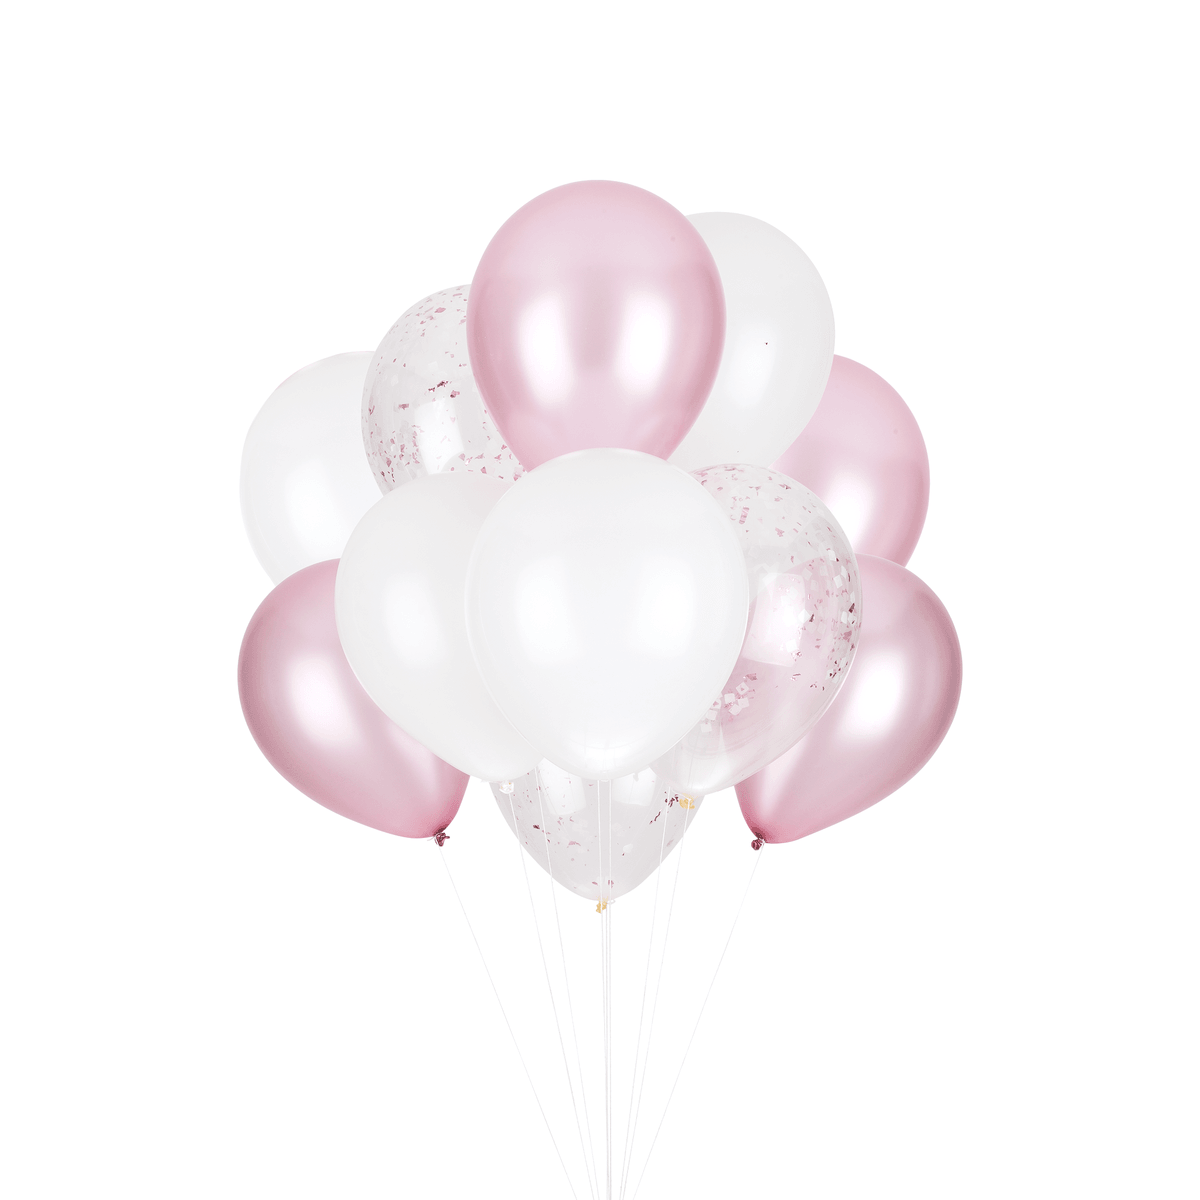 Rose Gold Classic Balloon Bouquet - ONE UP BALLOONS